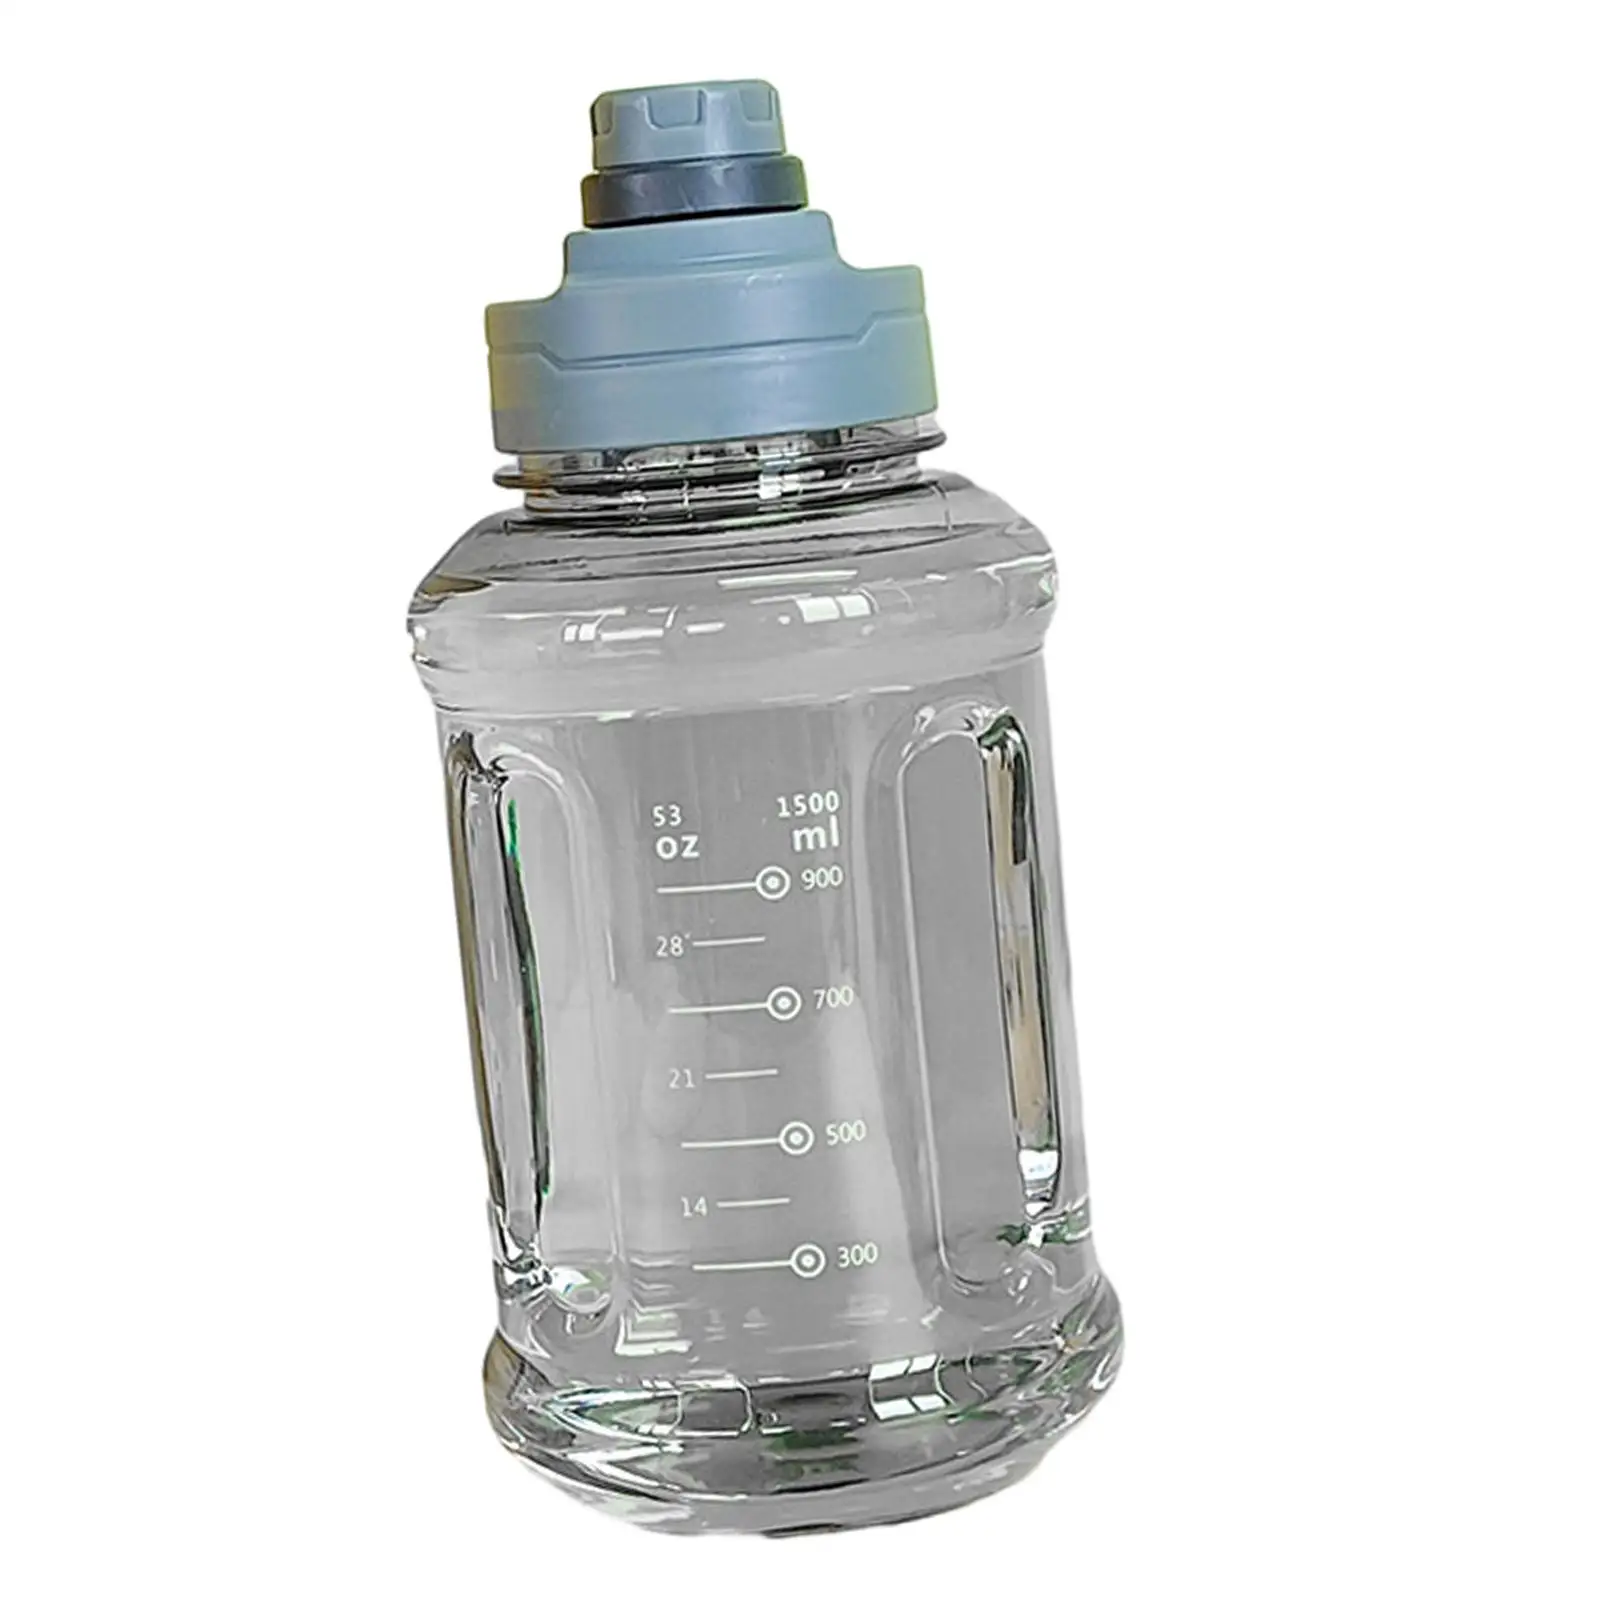 Gym Bottle Sports Water Bottle 1.5L Easy to Use Large Capacity Reusable 11x24cm with Scale Big Water Bottle Bottle